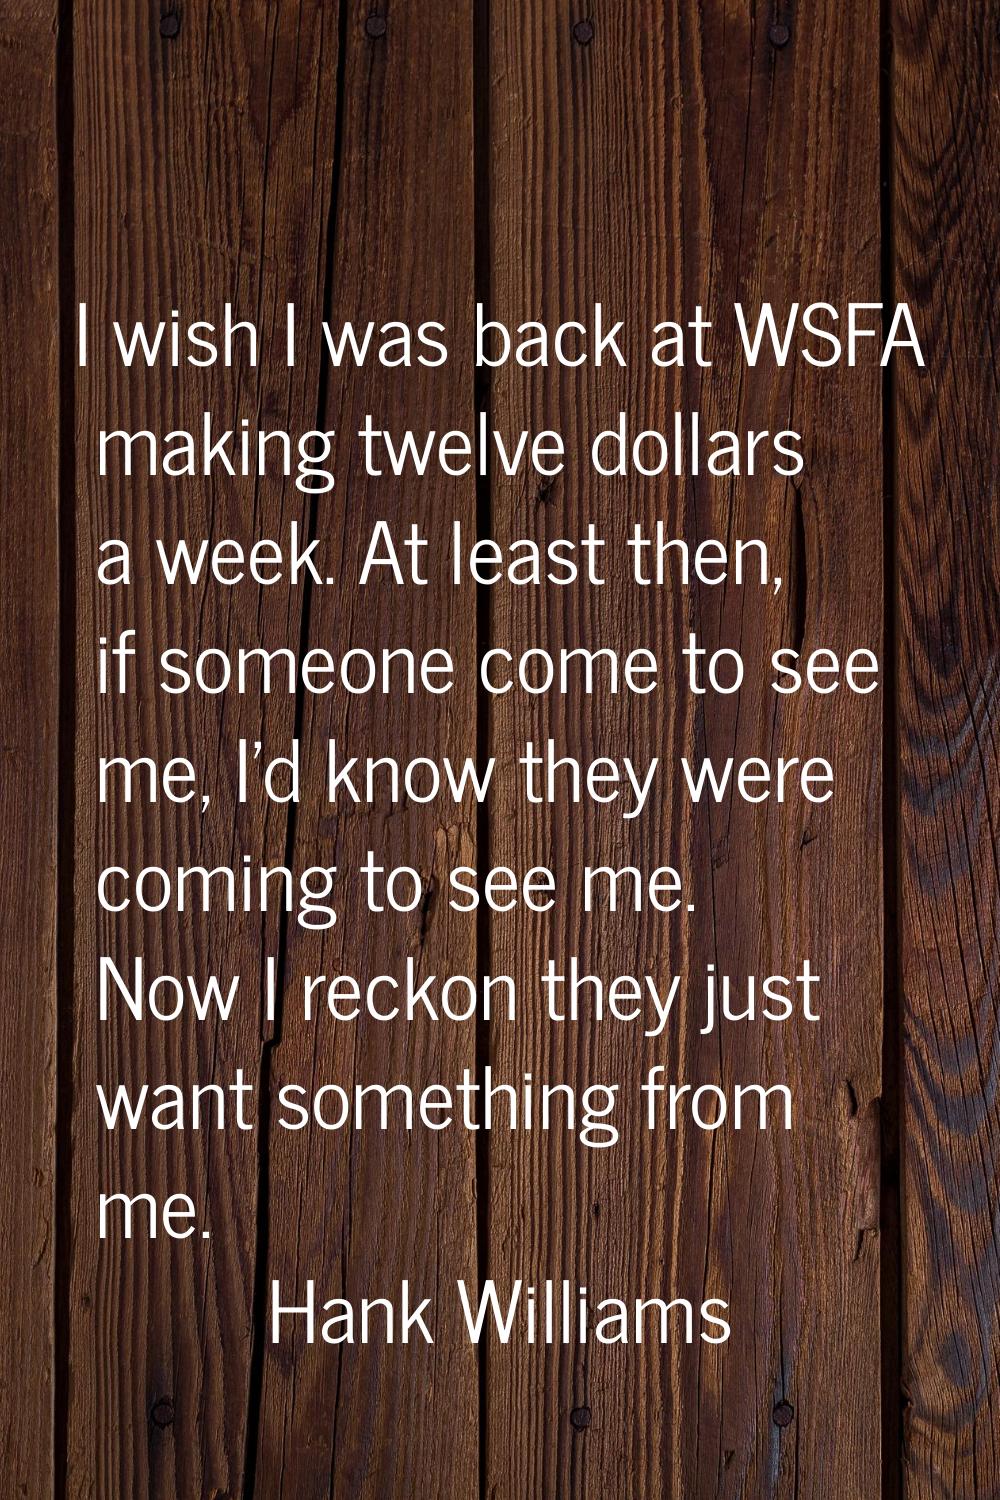 I wish I was back at WSFA making twelve dollars a week. At least then, if someone come to see me, I